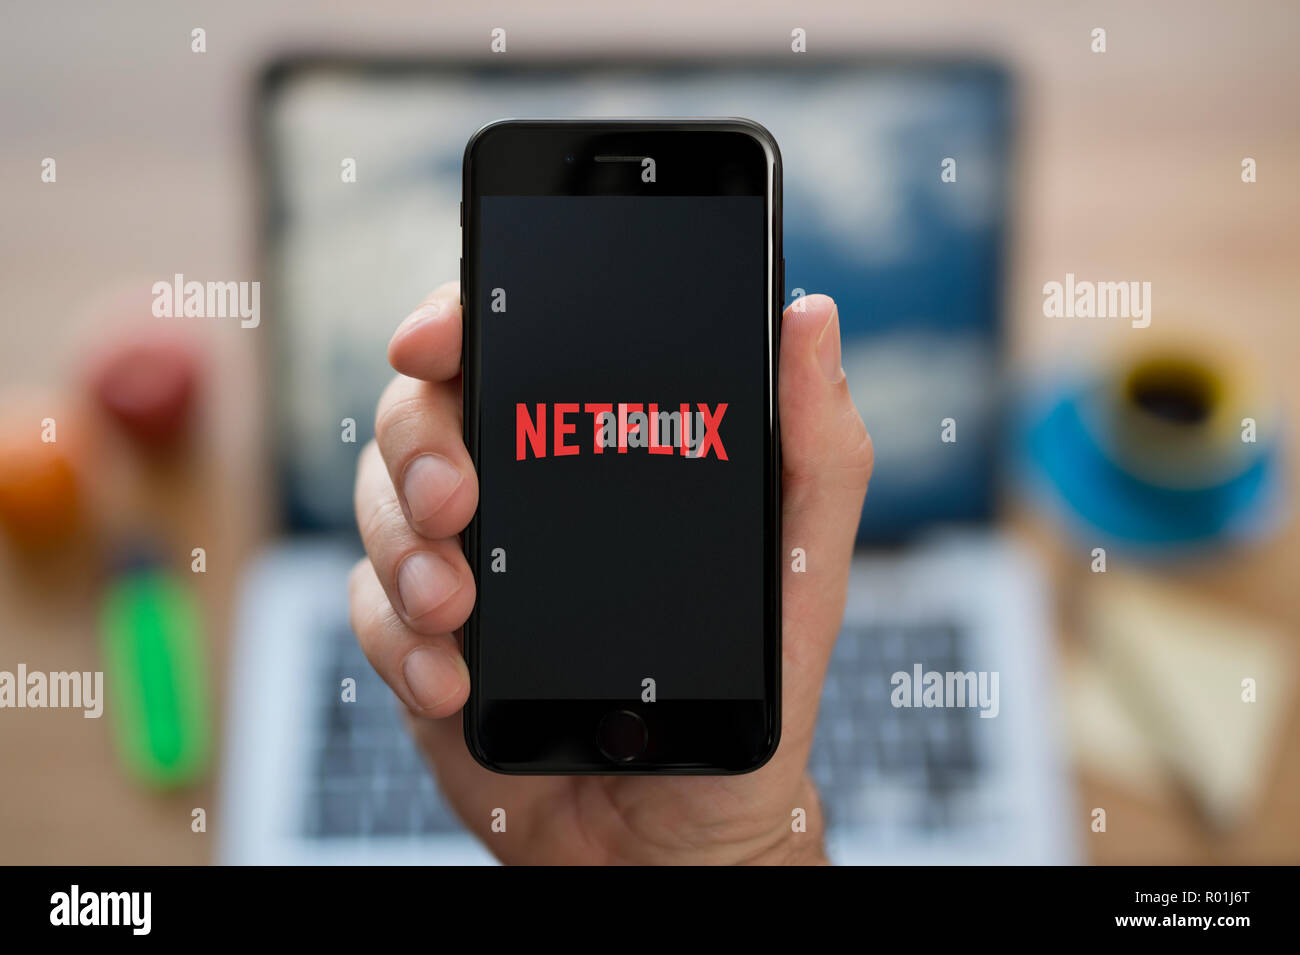 A man looks at his iPhone which displays the Netflix logo, while sat at his computer desk (Editorial use only). Stock Photo